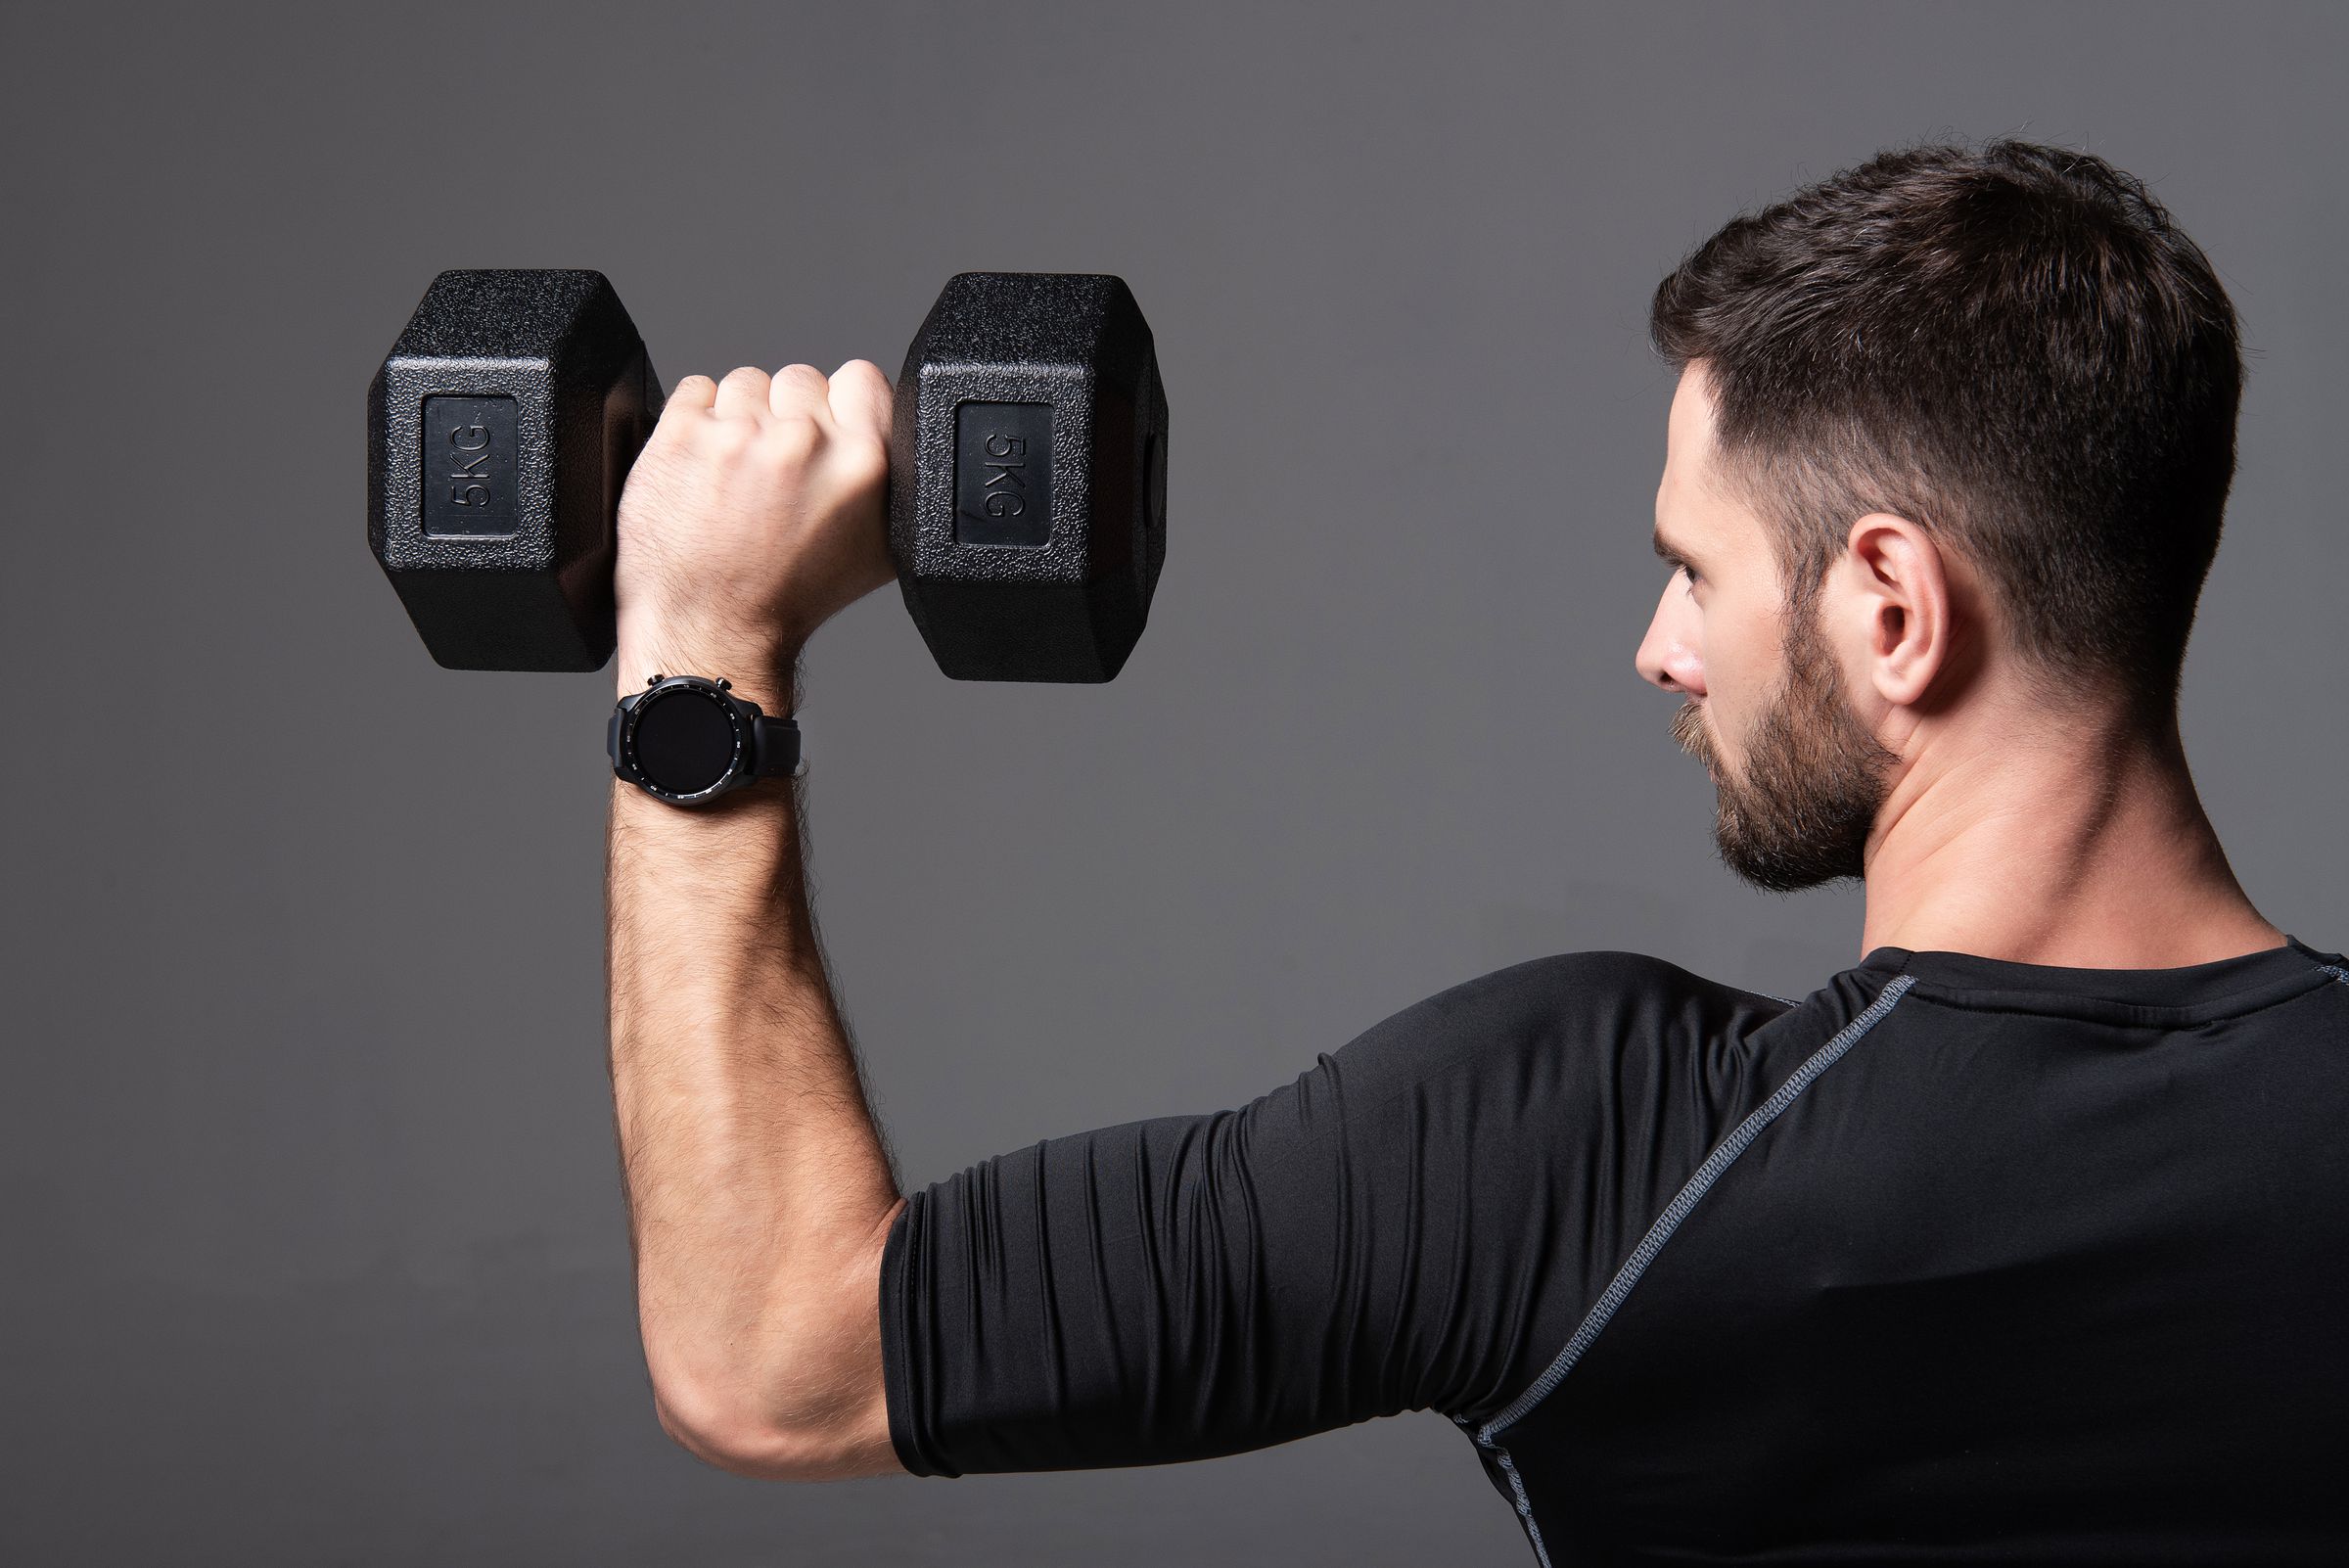 The smartwatch can track a range of workouts.